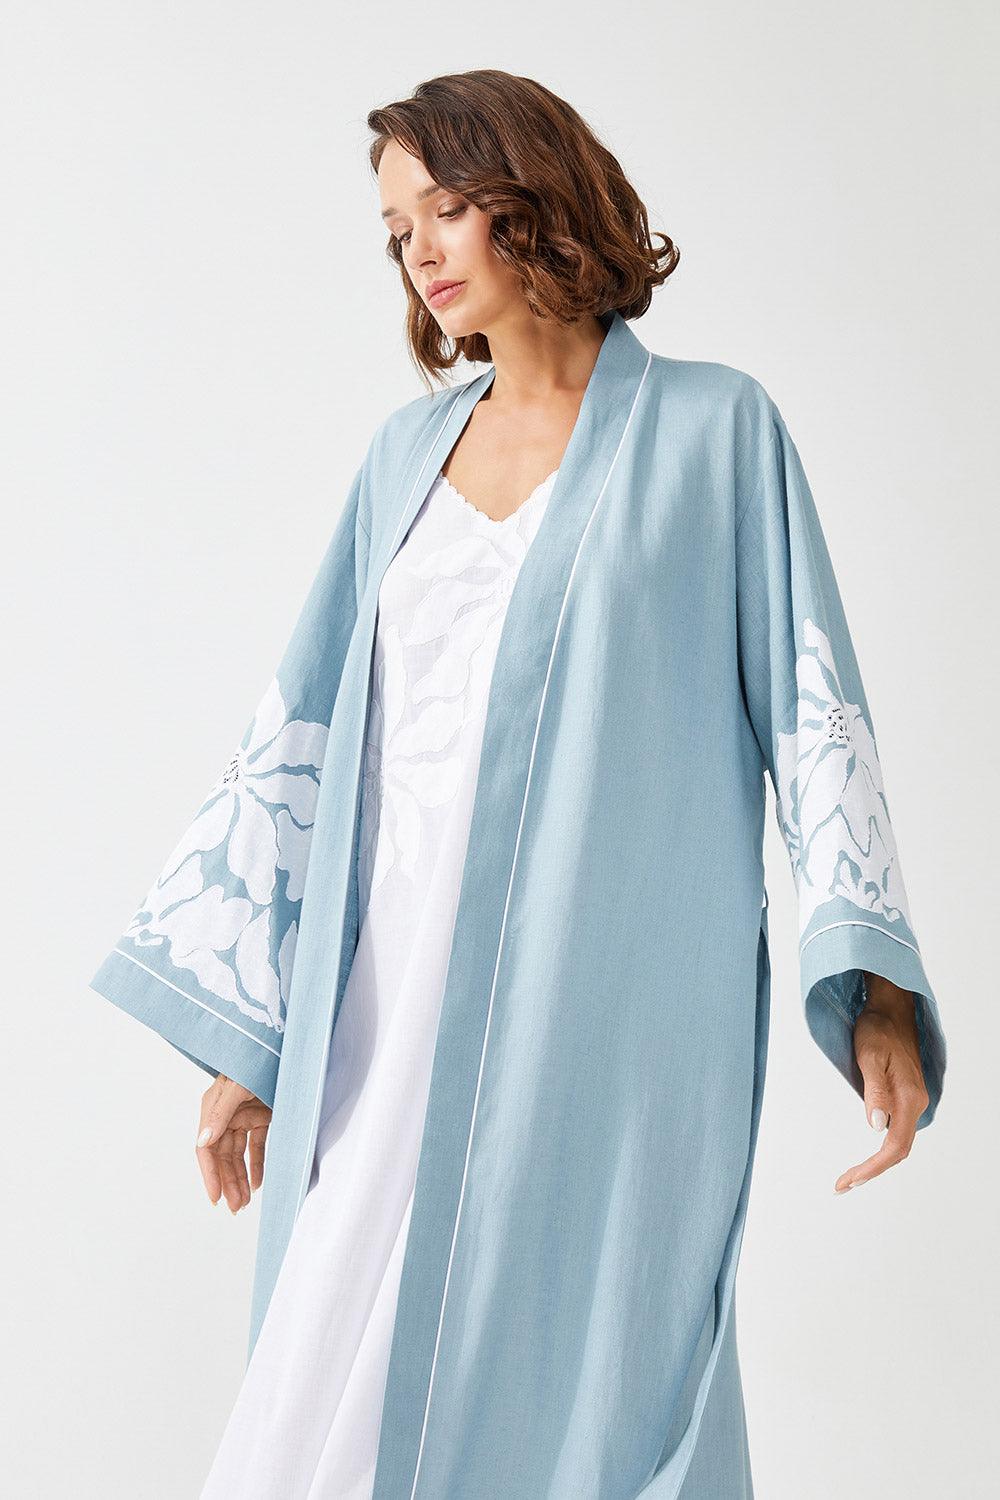 Lotus Long Linen Embroidered with Lace Kaftan Set - Nile Green - Bocan